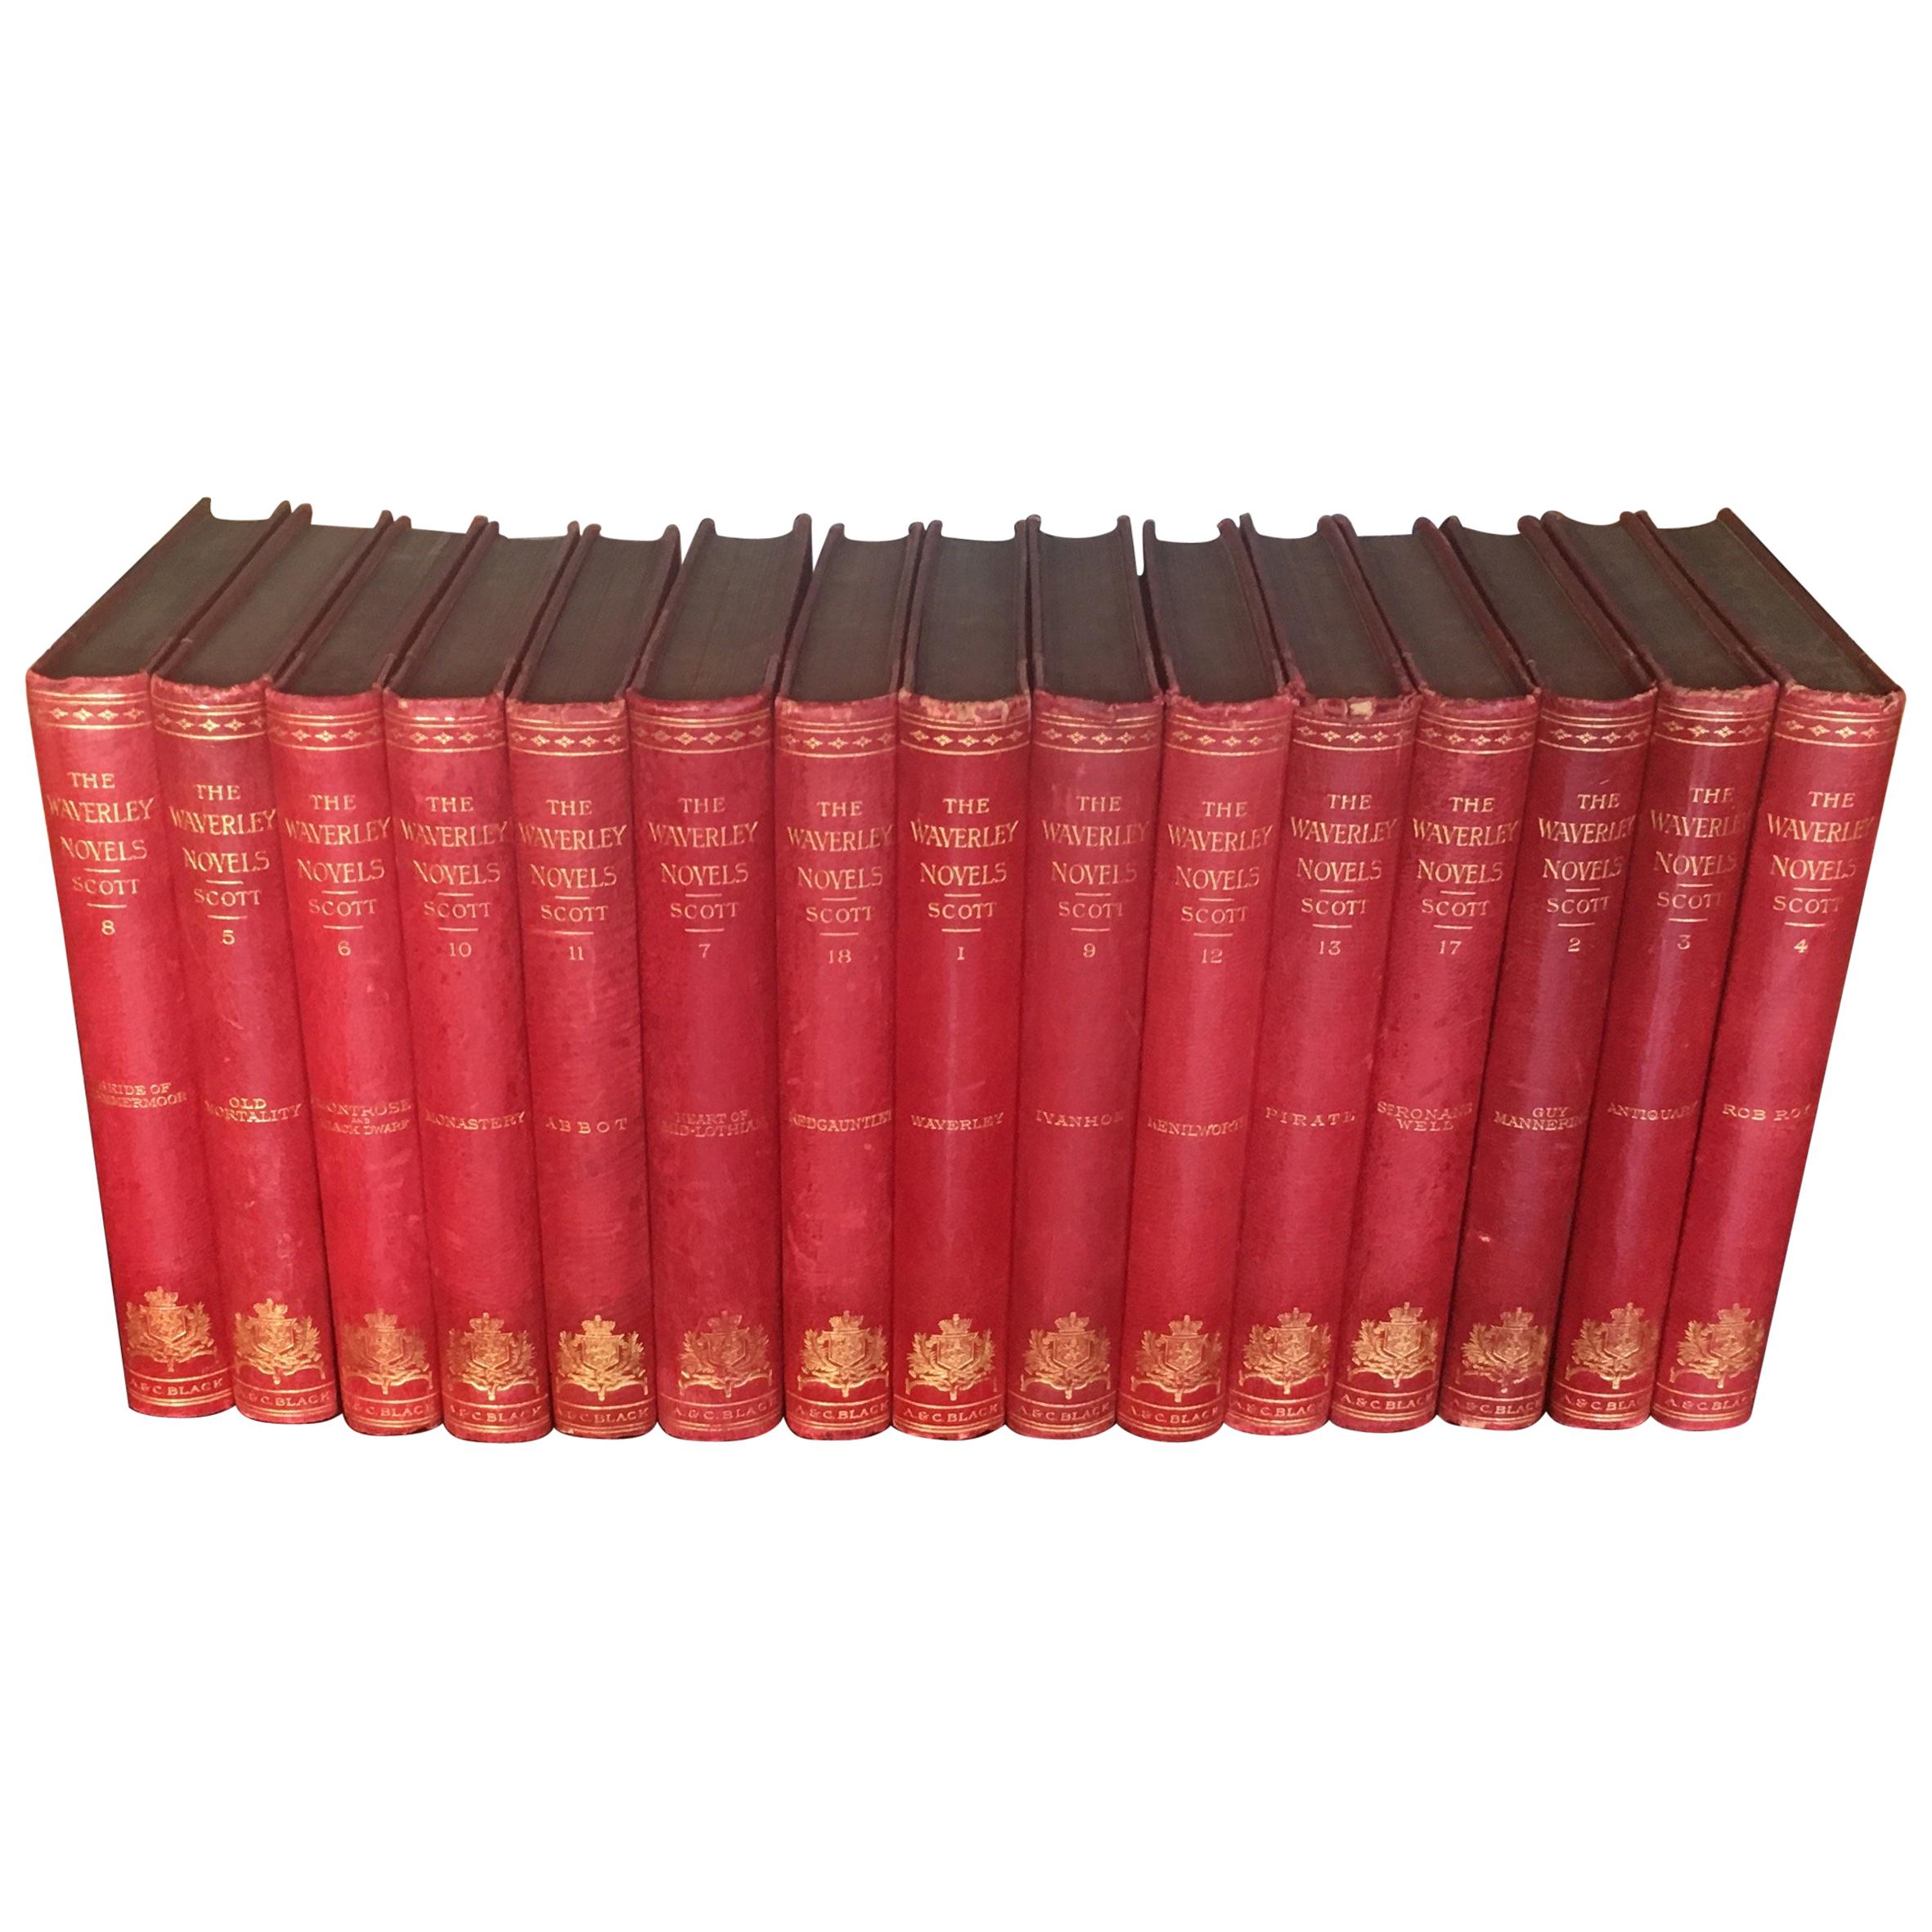 Extensive Collection of 19th Century Leather Bound Books Priced Per Book English